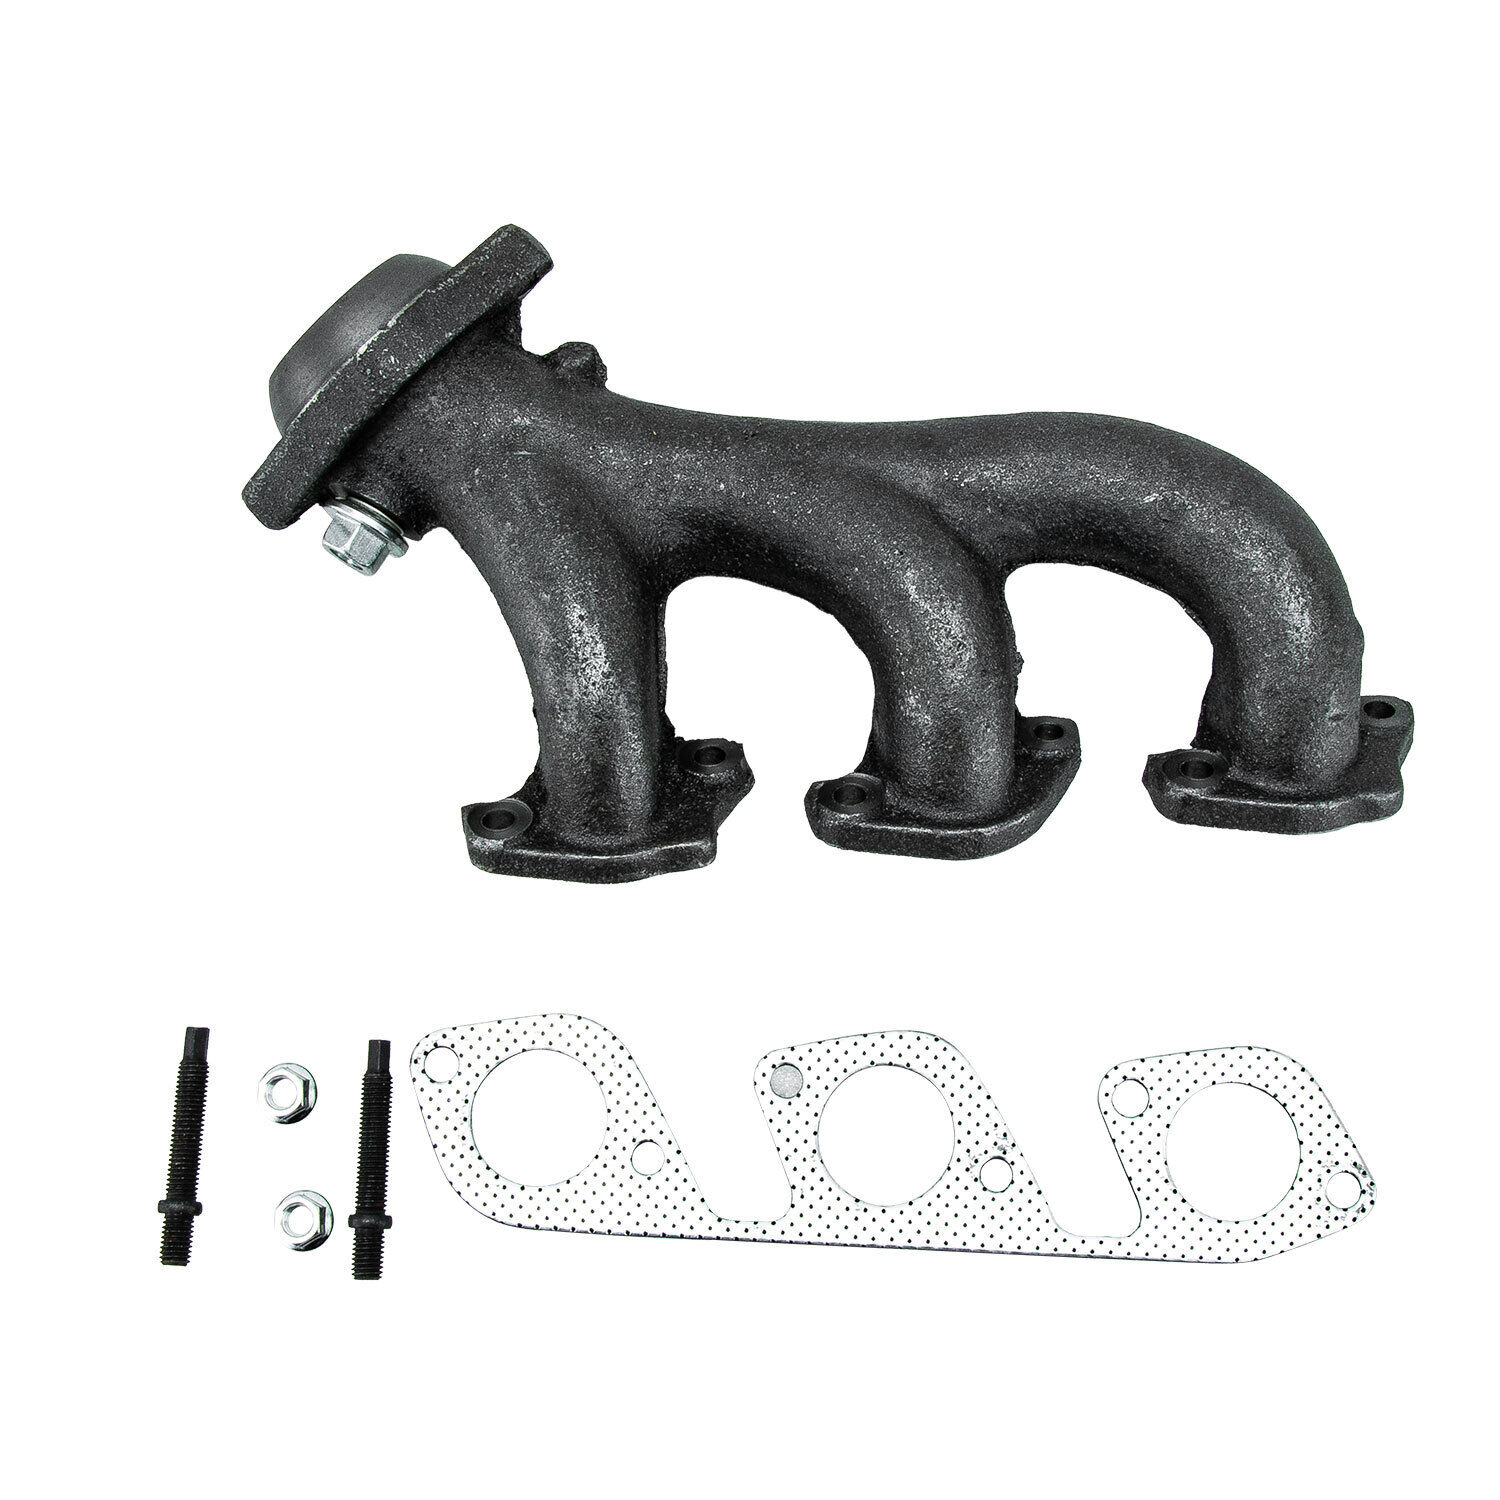 Left Exhaust Manifold w/ Gasket Kit for 1999-2008 Ford F-150 E-150 E-250 V6 4.2L